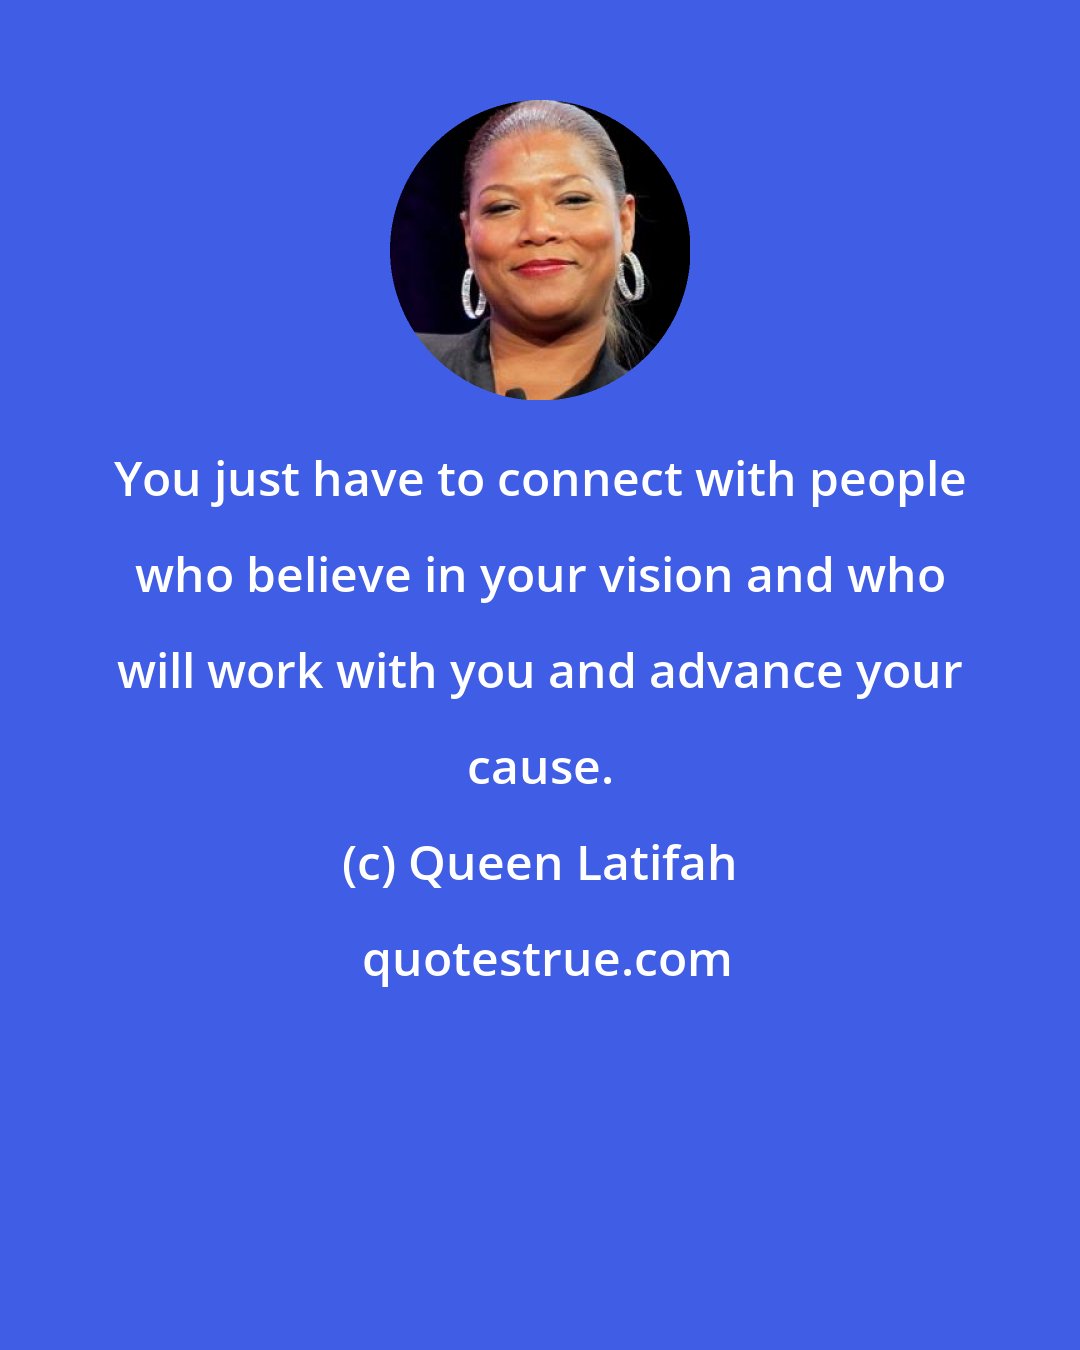 Queen Latifah: You just have to connect with people who believe in your vision and who will work with you and advance your cause.